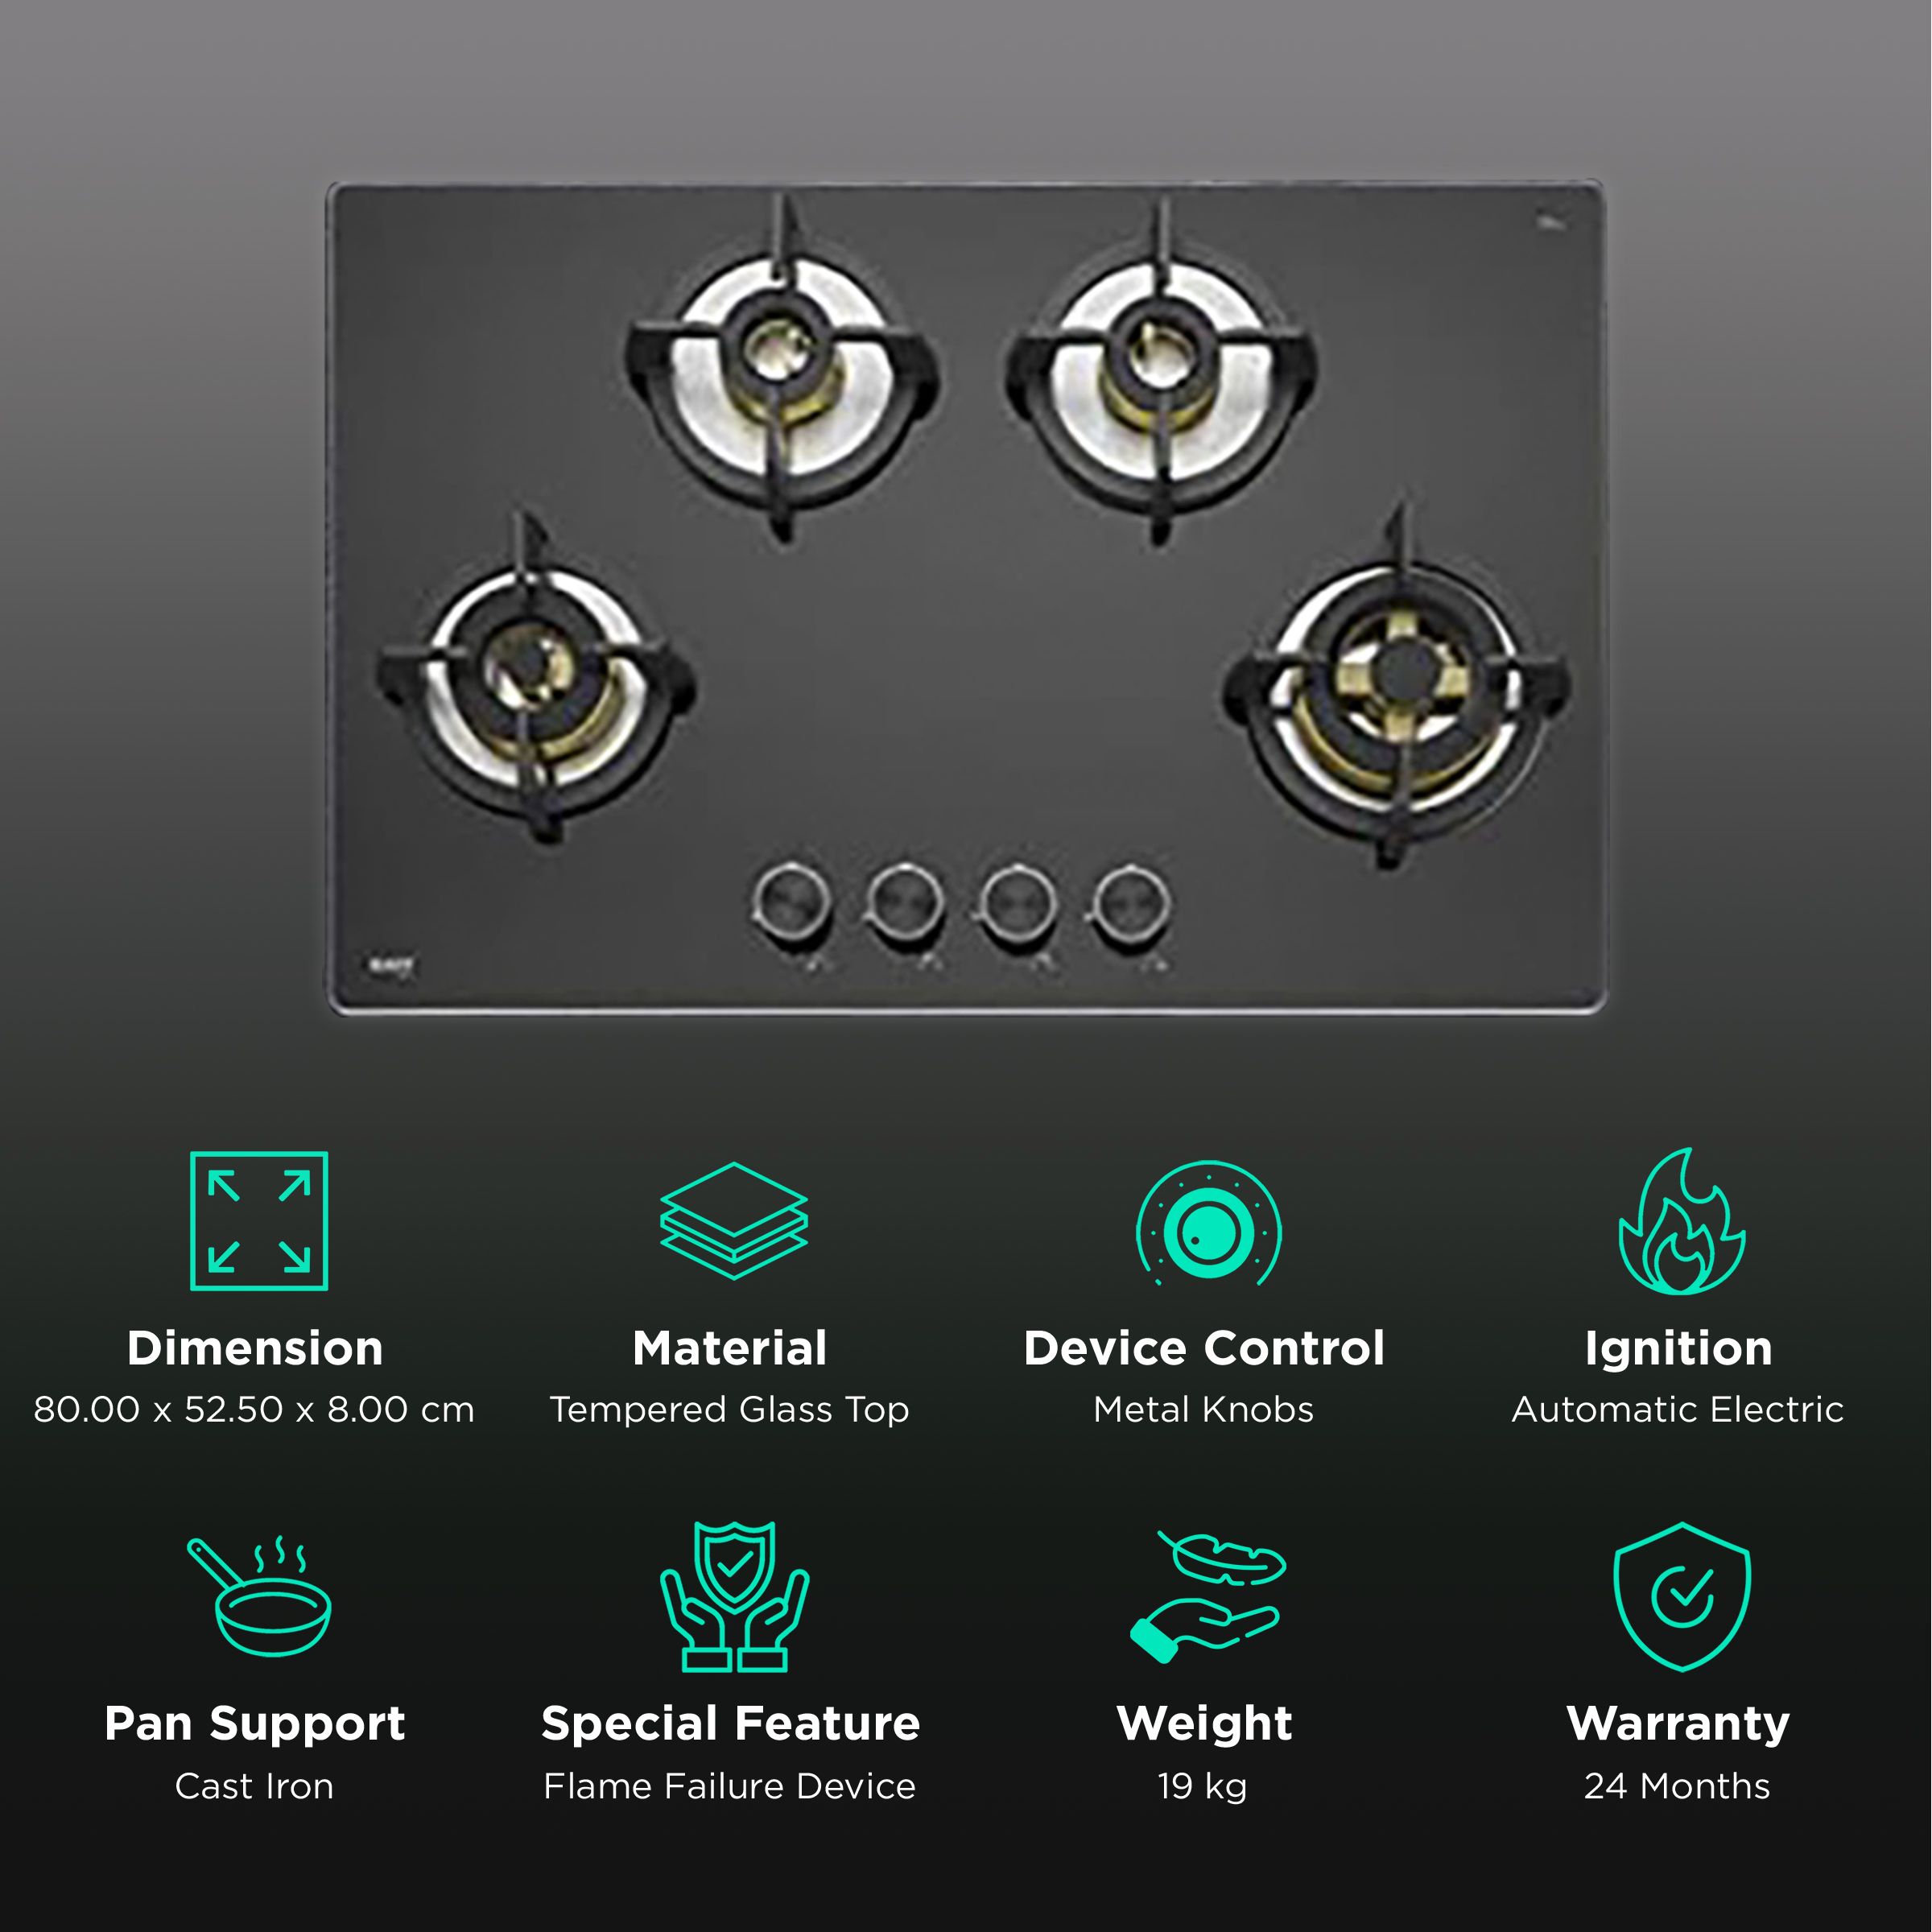 Buy KAFF BLH 804 Tempered Glass Top 4 Burner Automatic Electric Hob ...